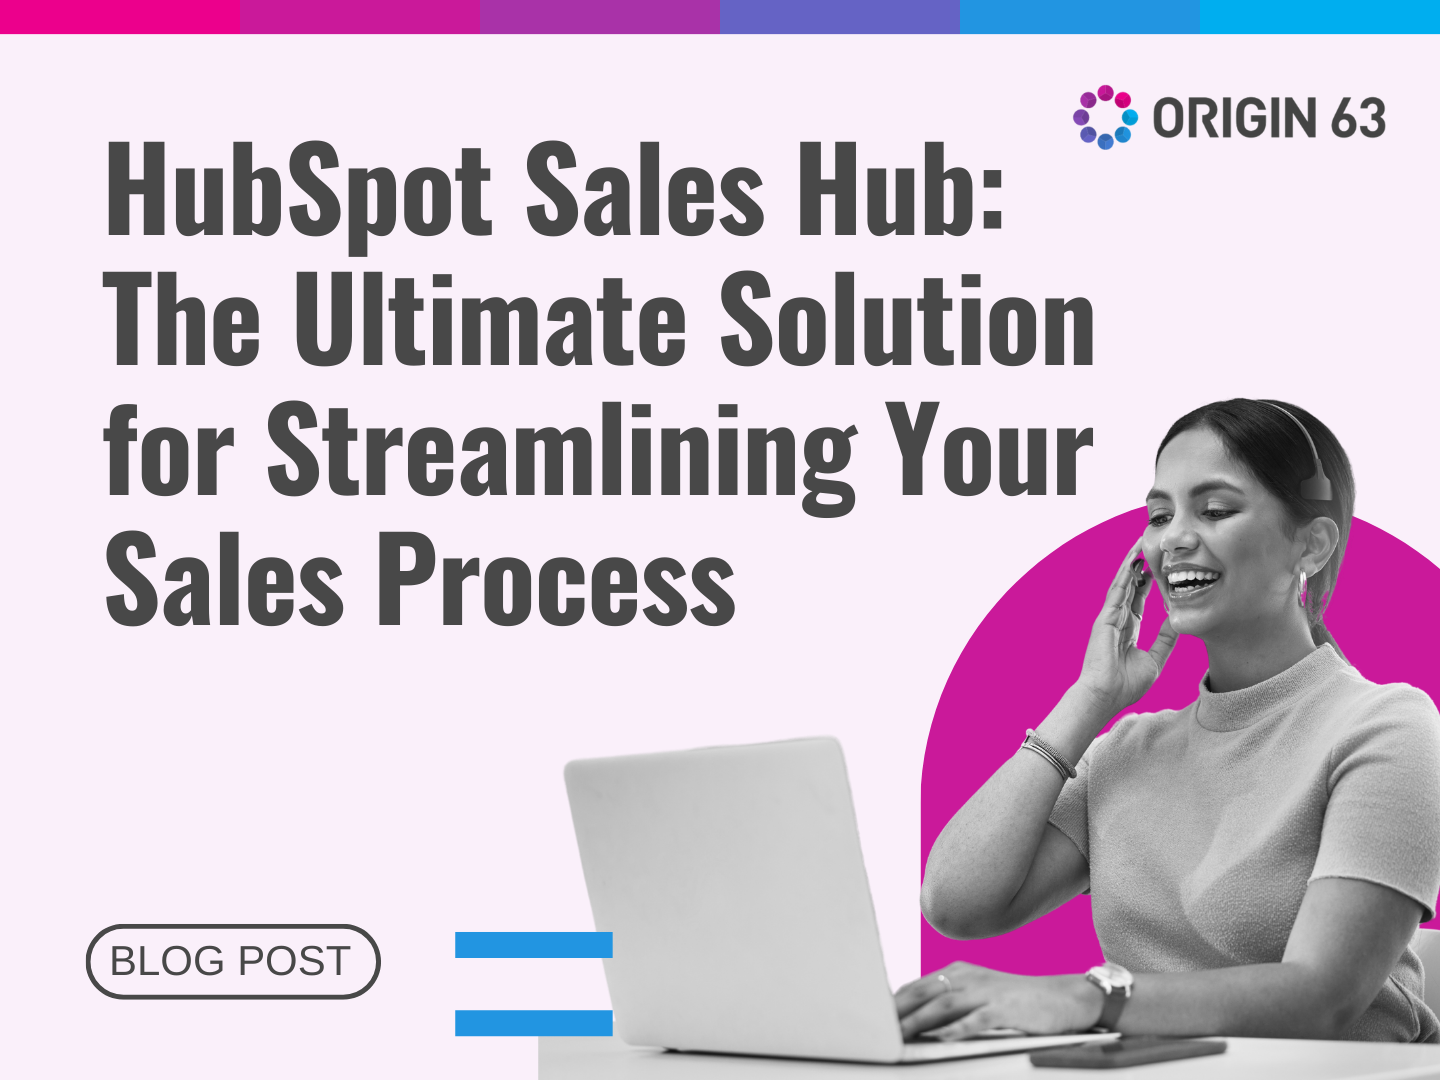 Learn how Origin63 optimized their sales process for ultimate efficiency.